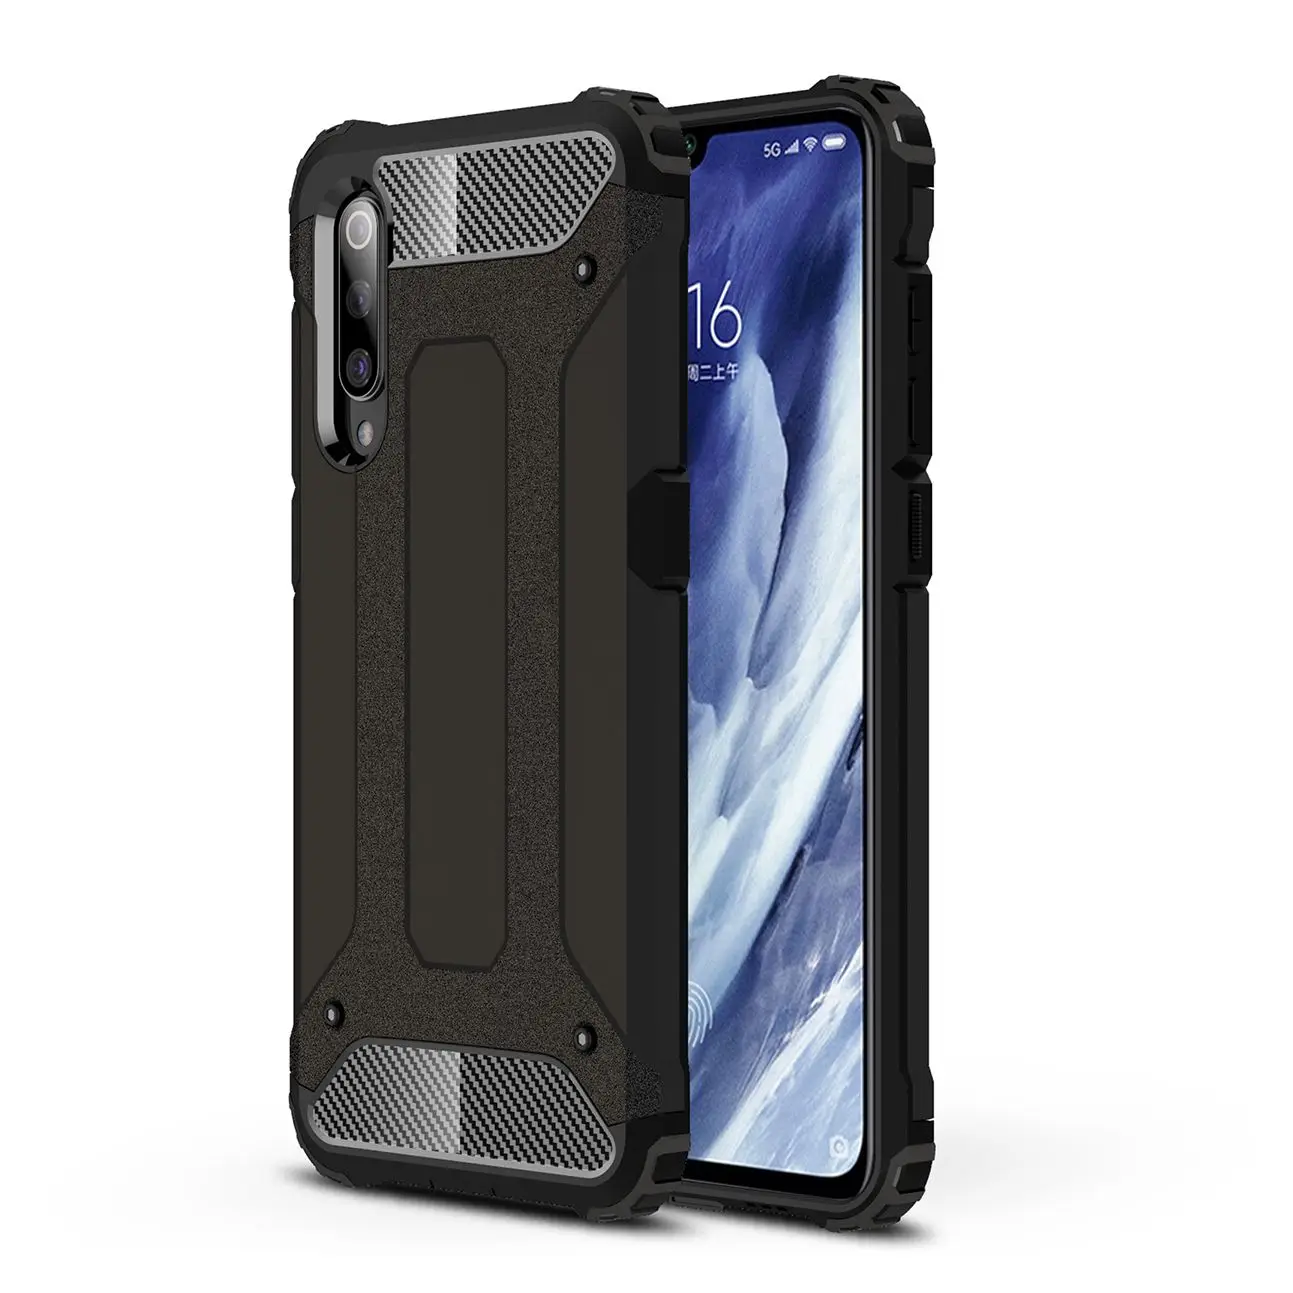 

Heavy protection Shockproof Rugged Armor Phone Case For Xiaomi Redmi Note Poco F1 5 6 4 4X 9T K20 7 6A 7A Pro Plus PC Case Cover